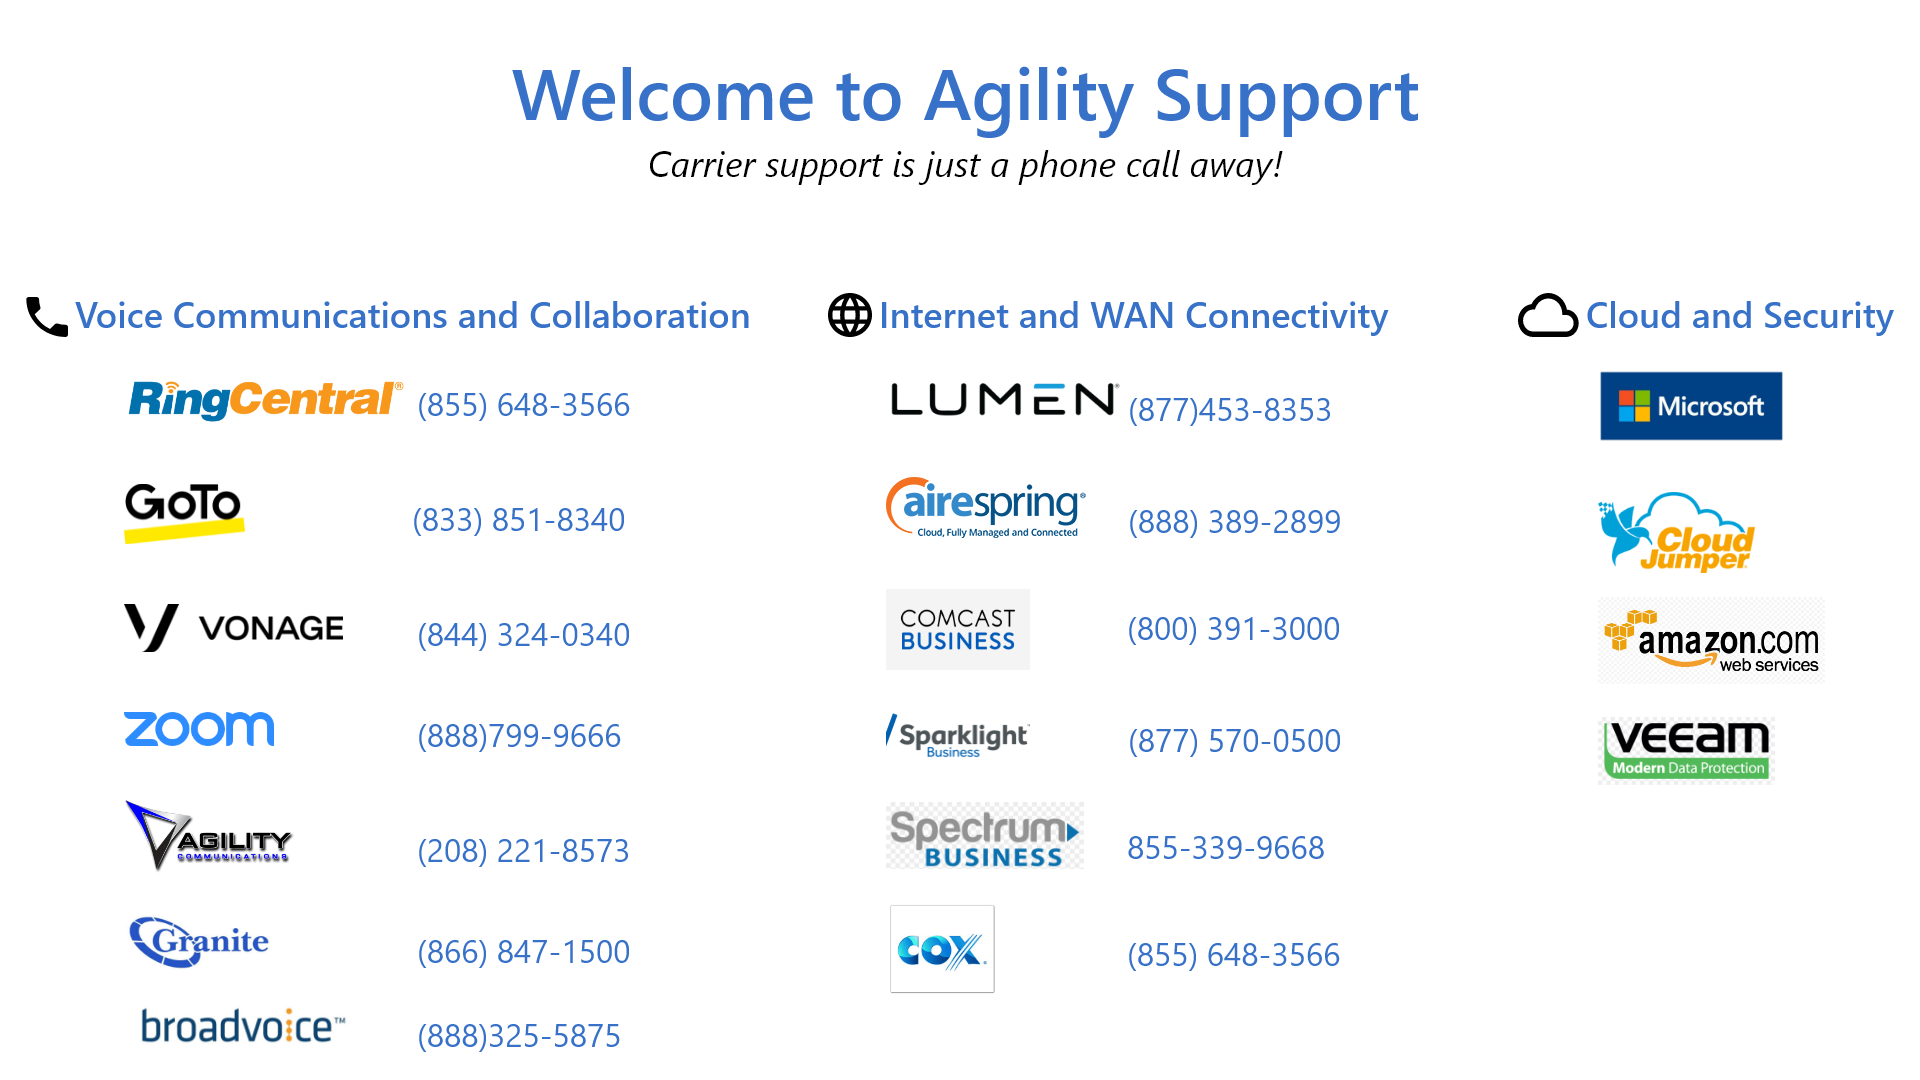 Agility Support